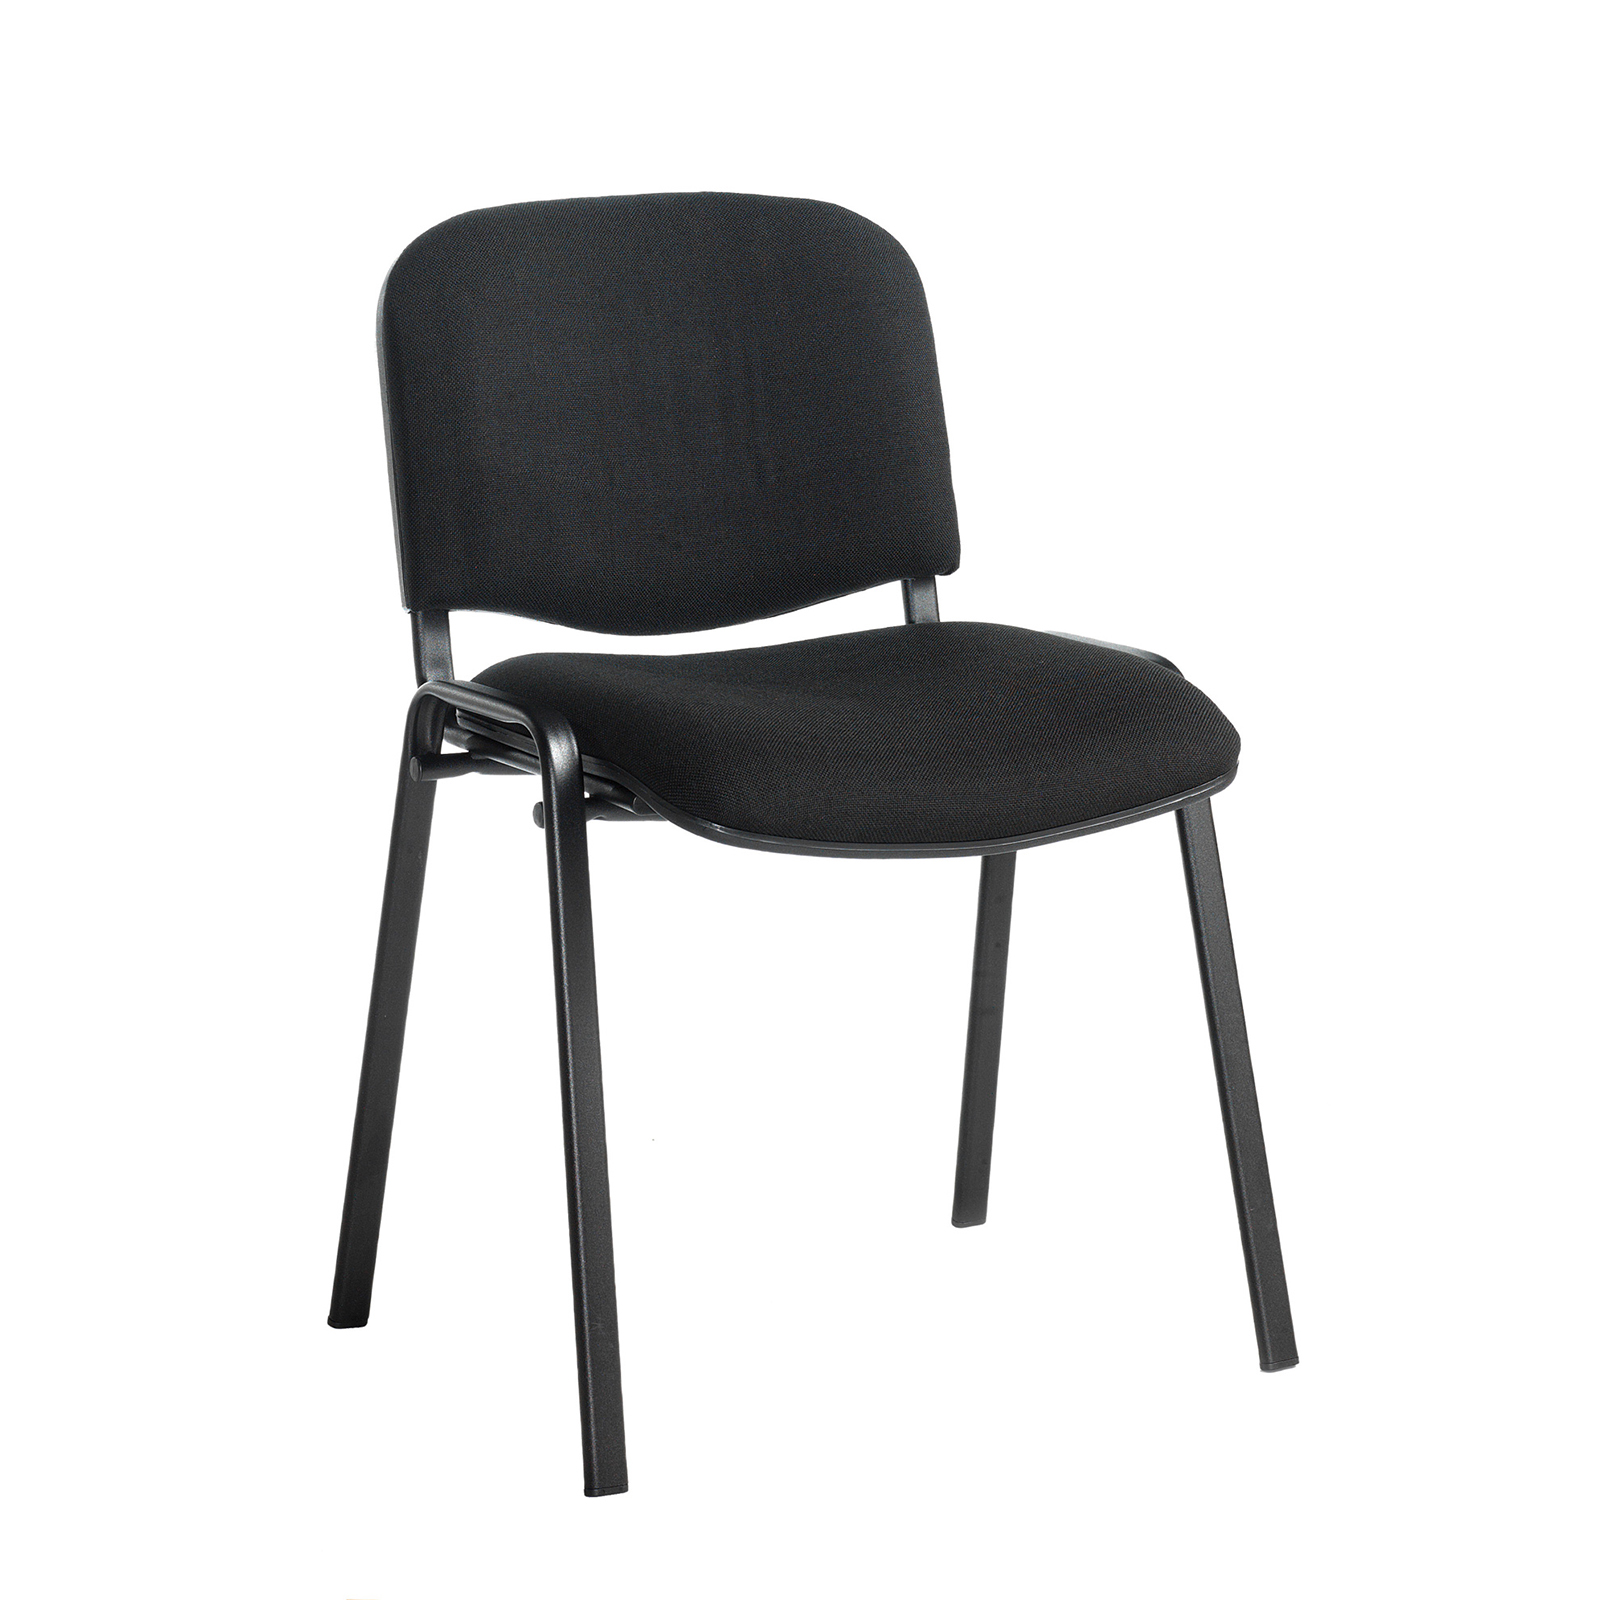 Boardroom / Meeting Taurus meeting room stackable chair with black frame and no arms - black